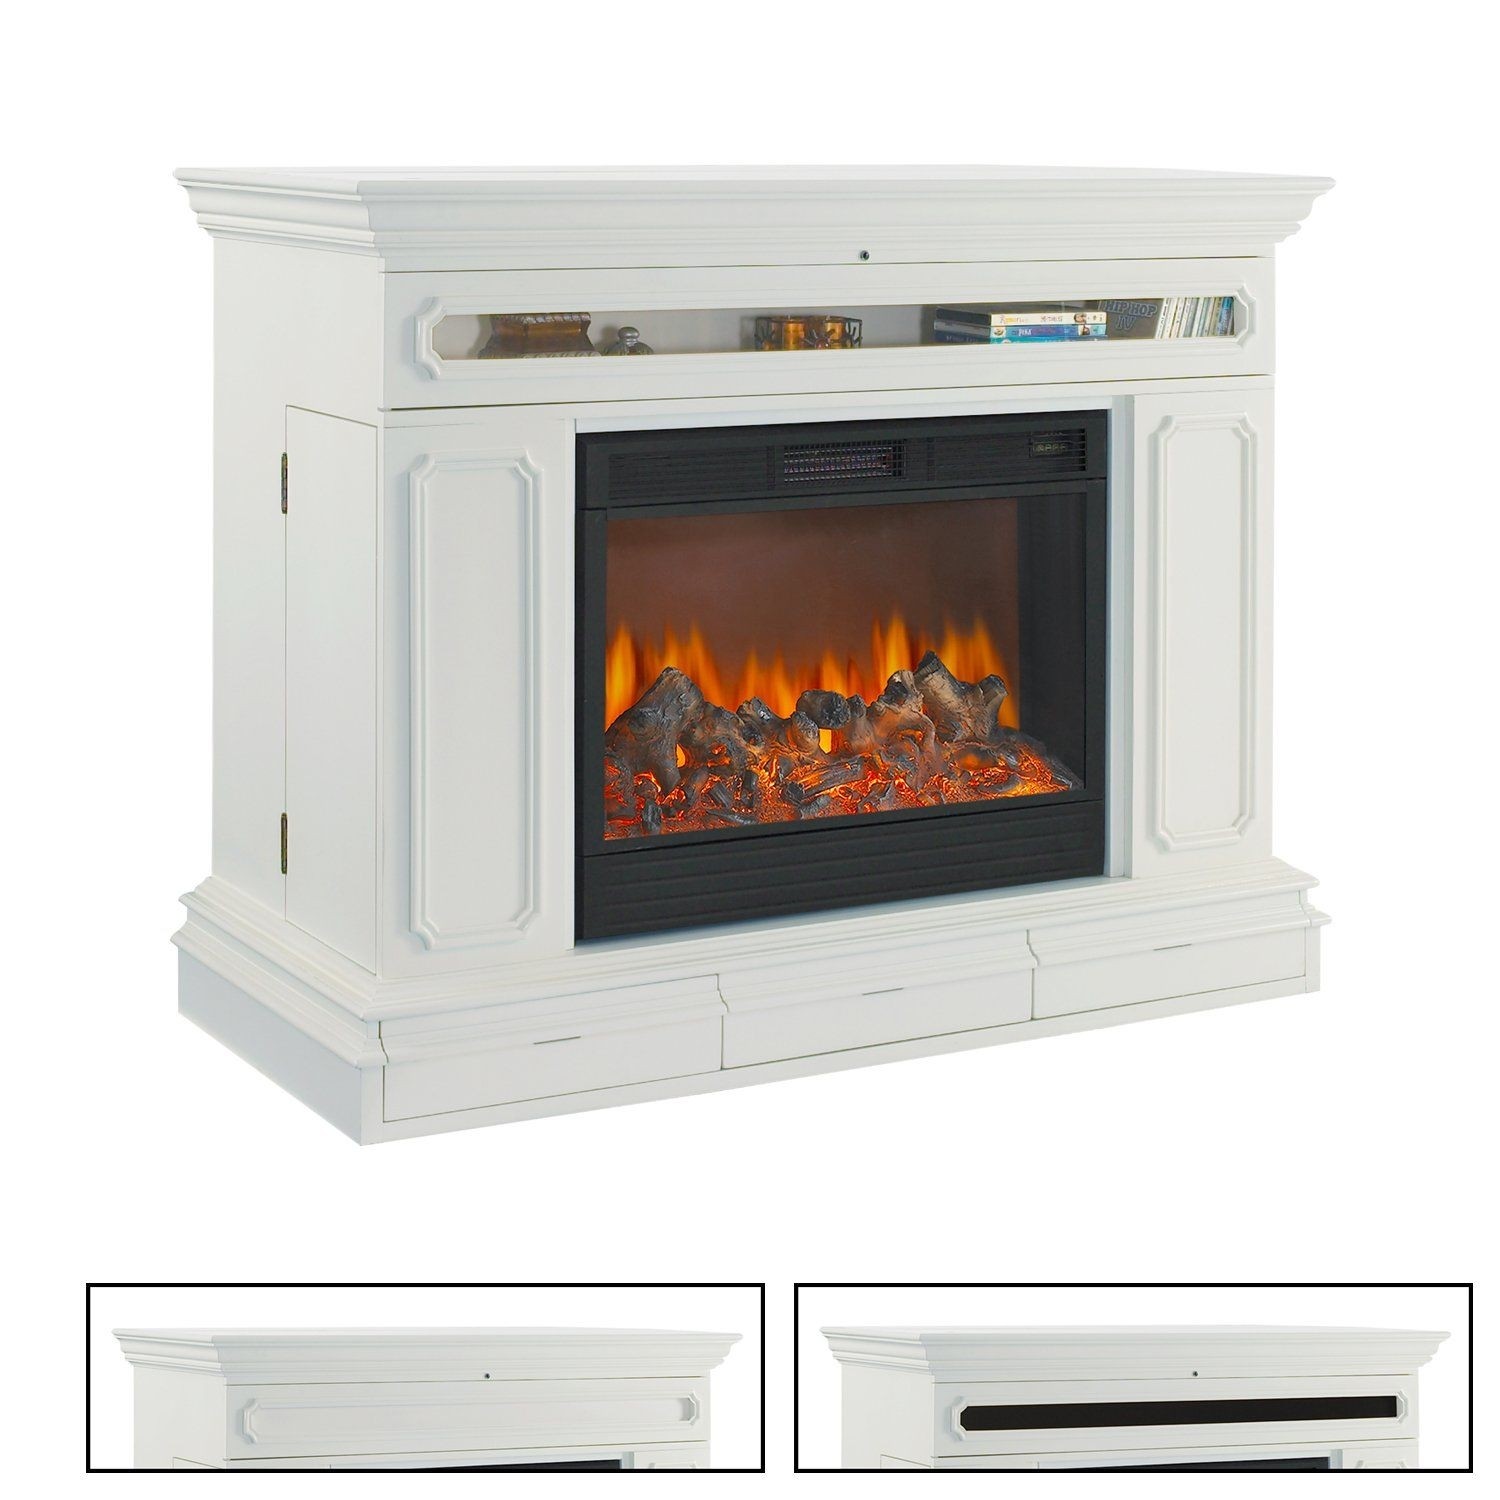 Tv lift cabinet at004602w remington electric fireplace tv